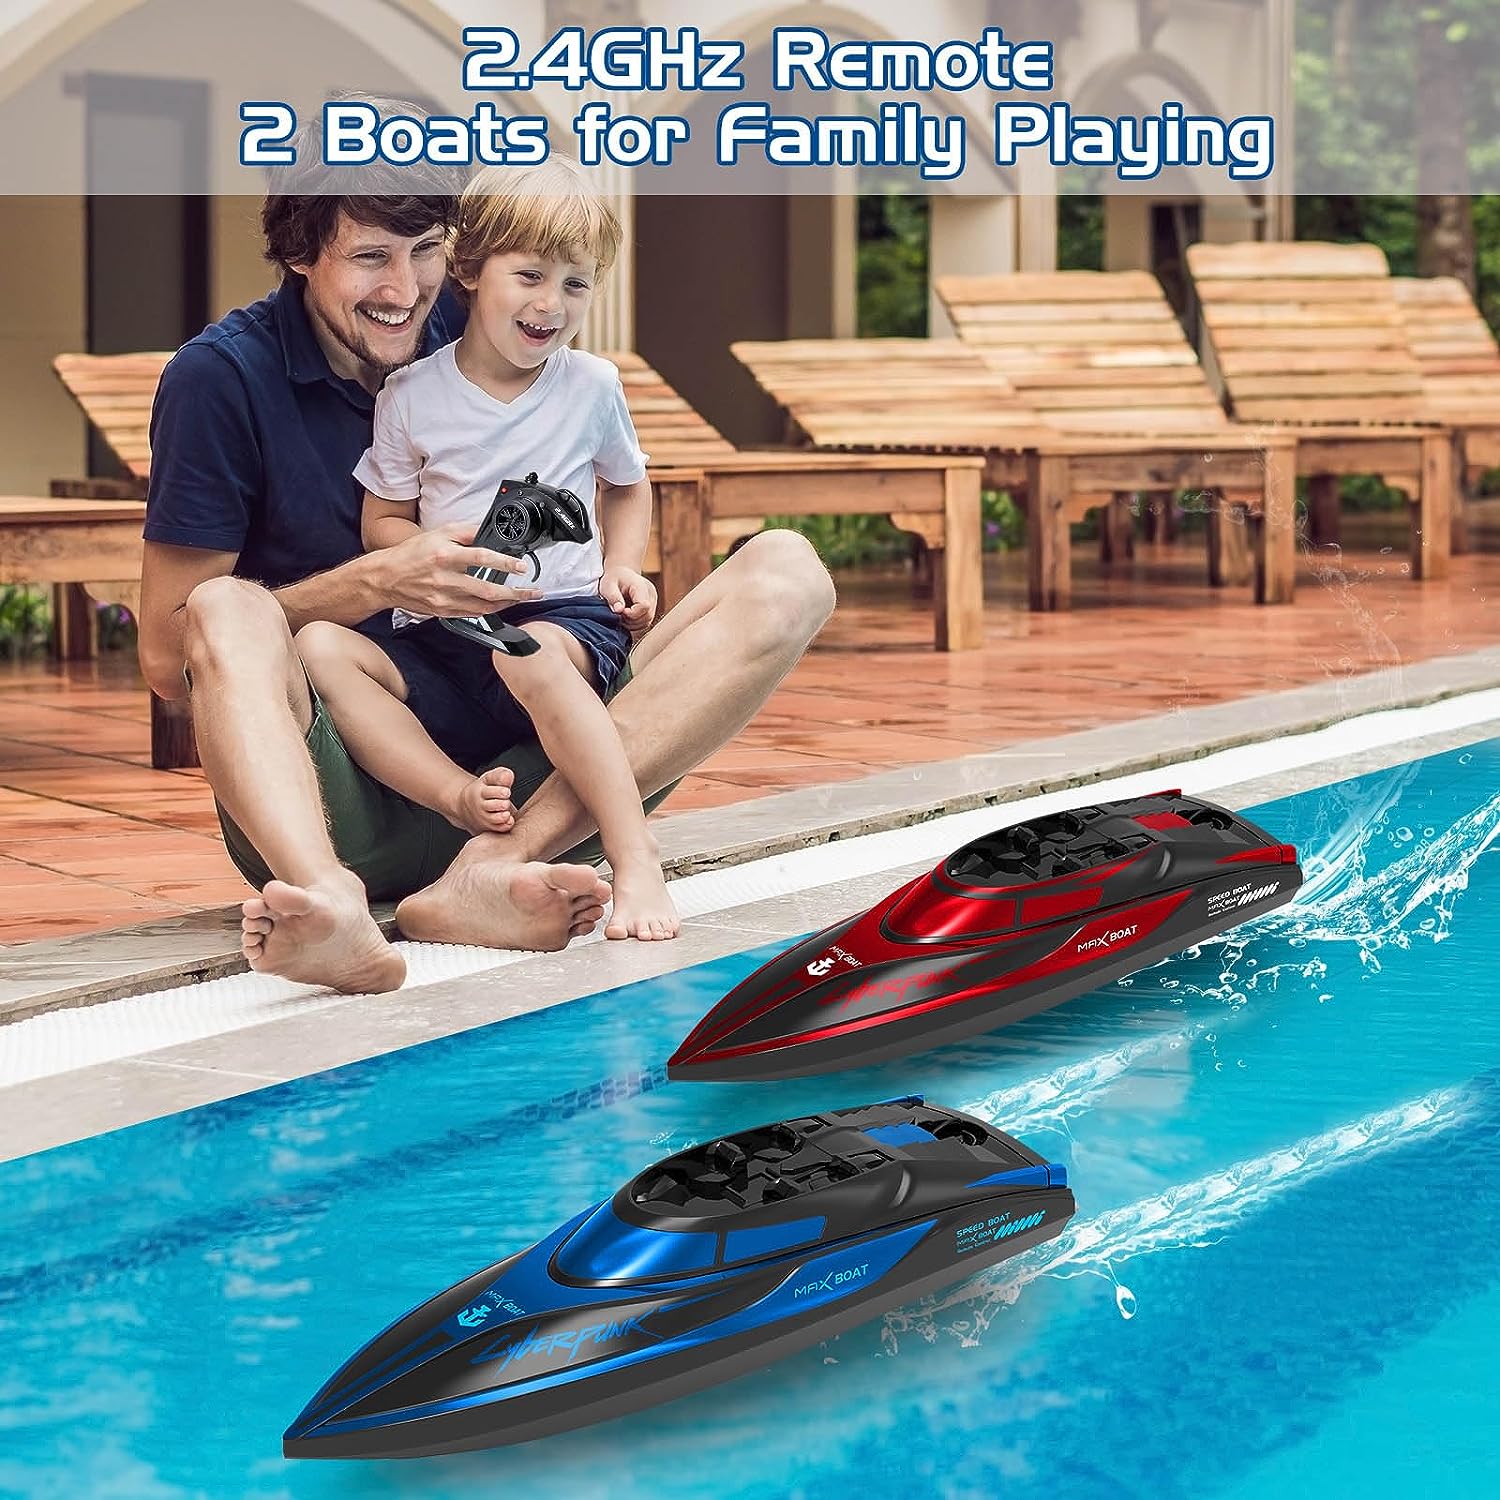 Yamaester RC Boat Review: A Glowing Toy for Endless Water Fun